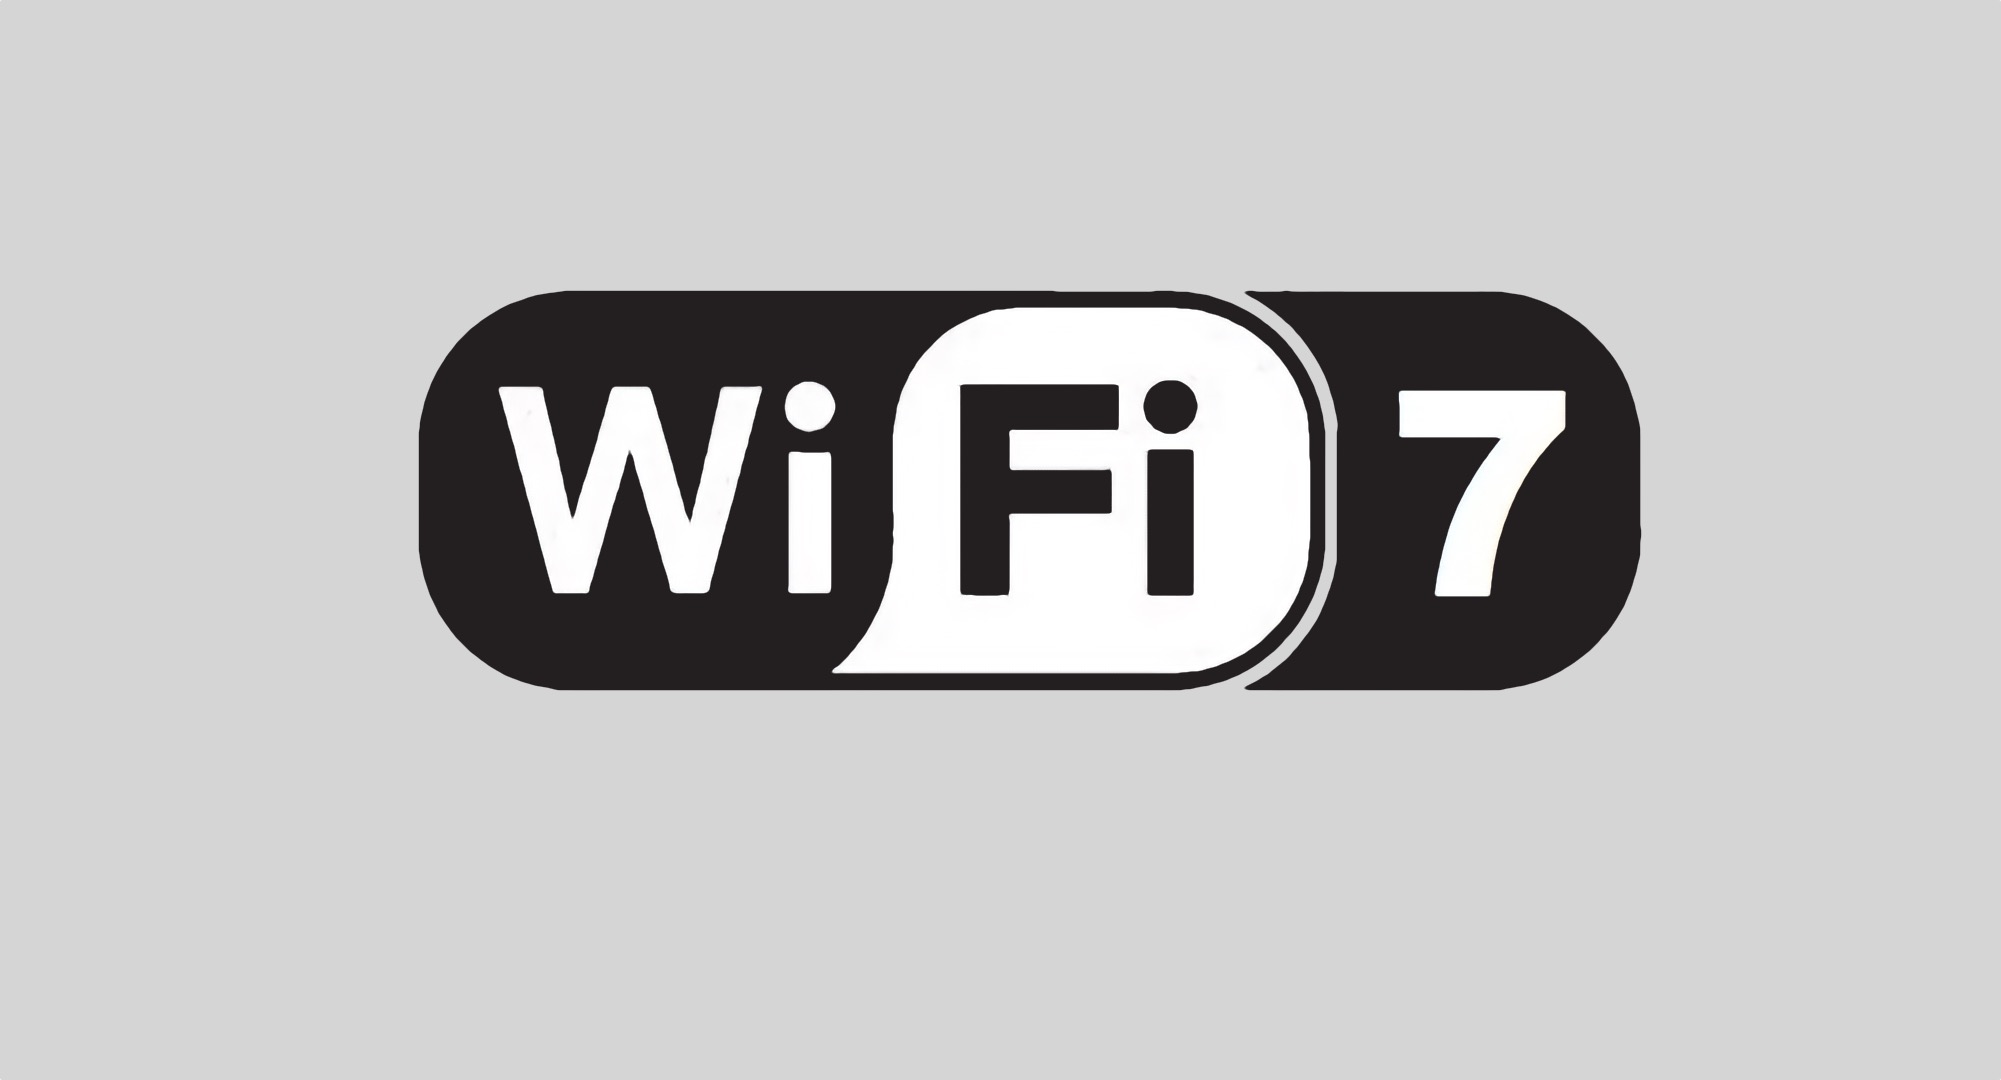 Wi-Fi 7 is getting closer - MediaTek announces the introduction of a new network standard